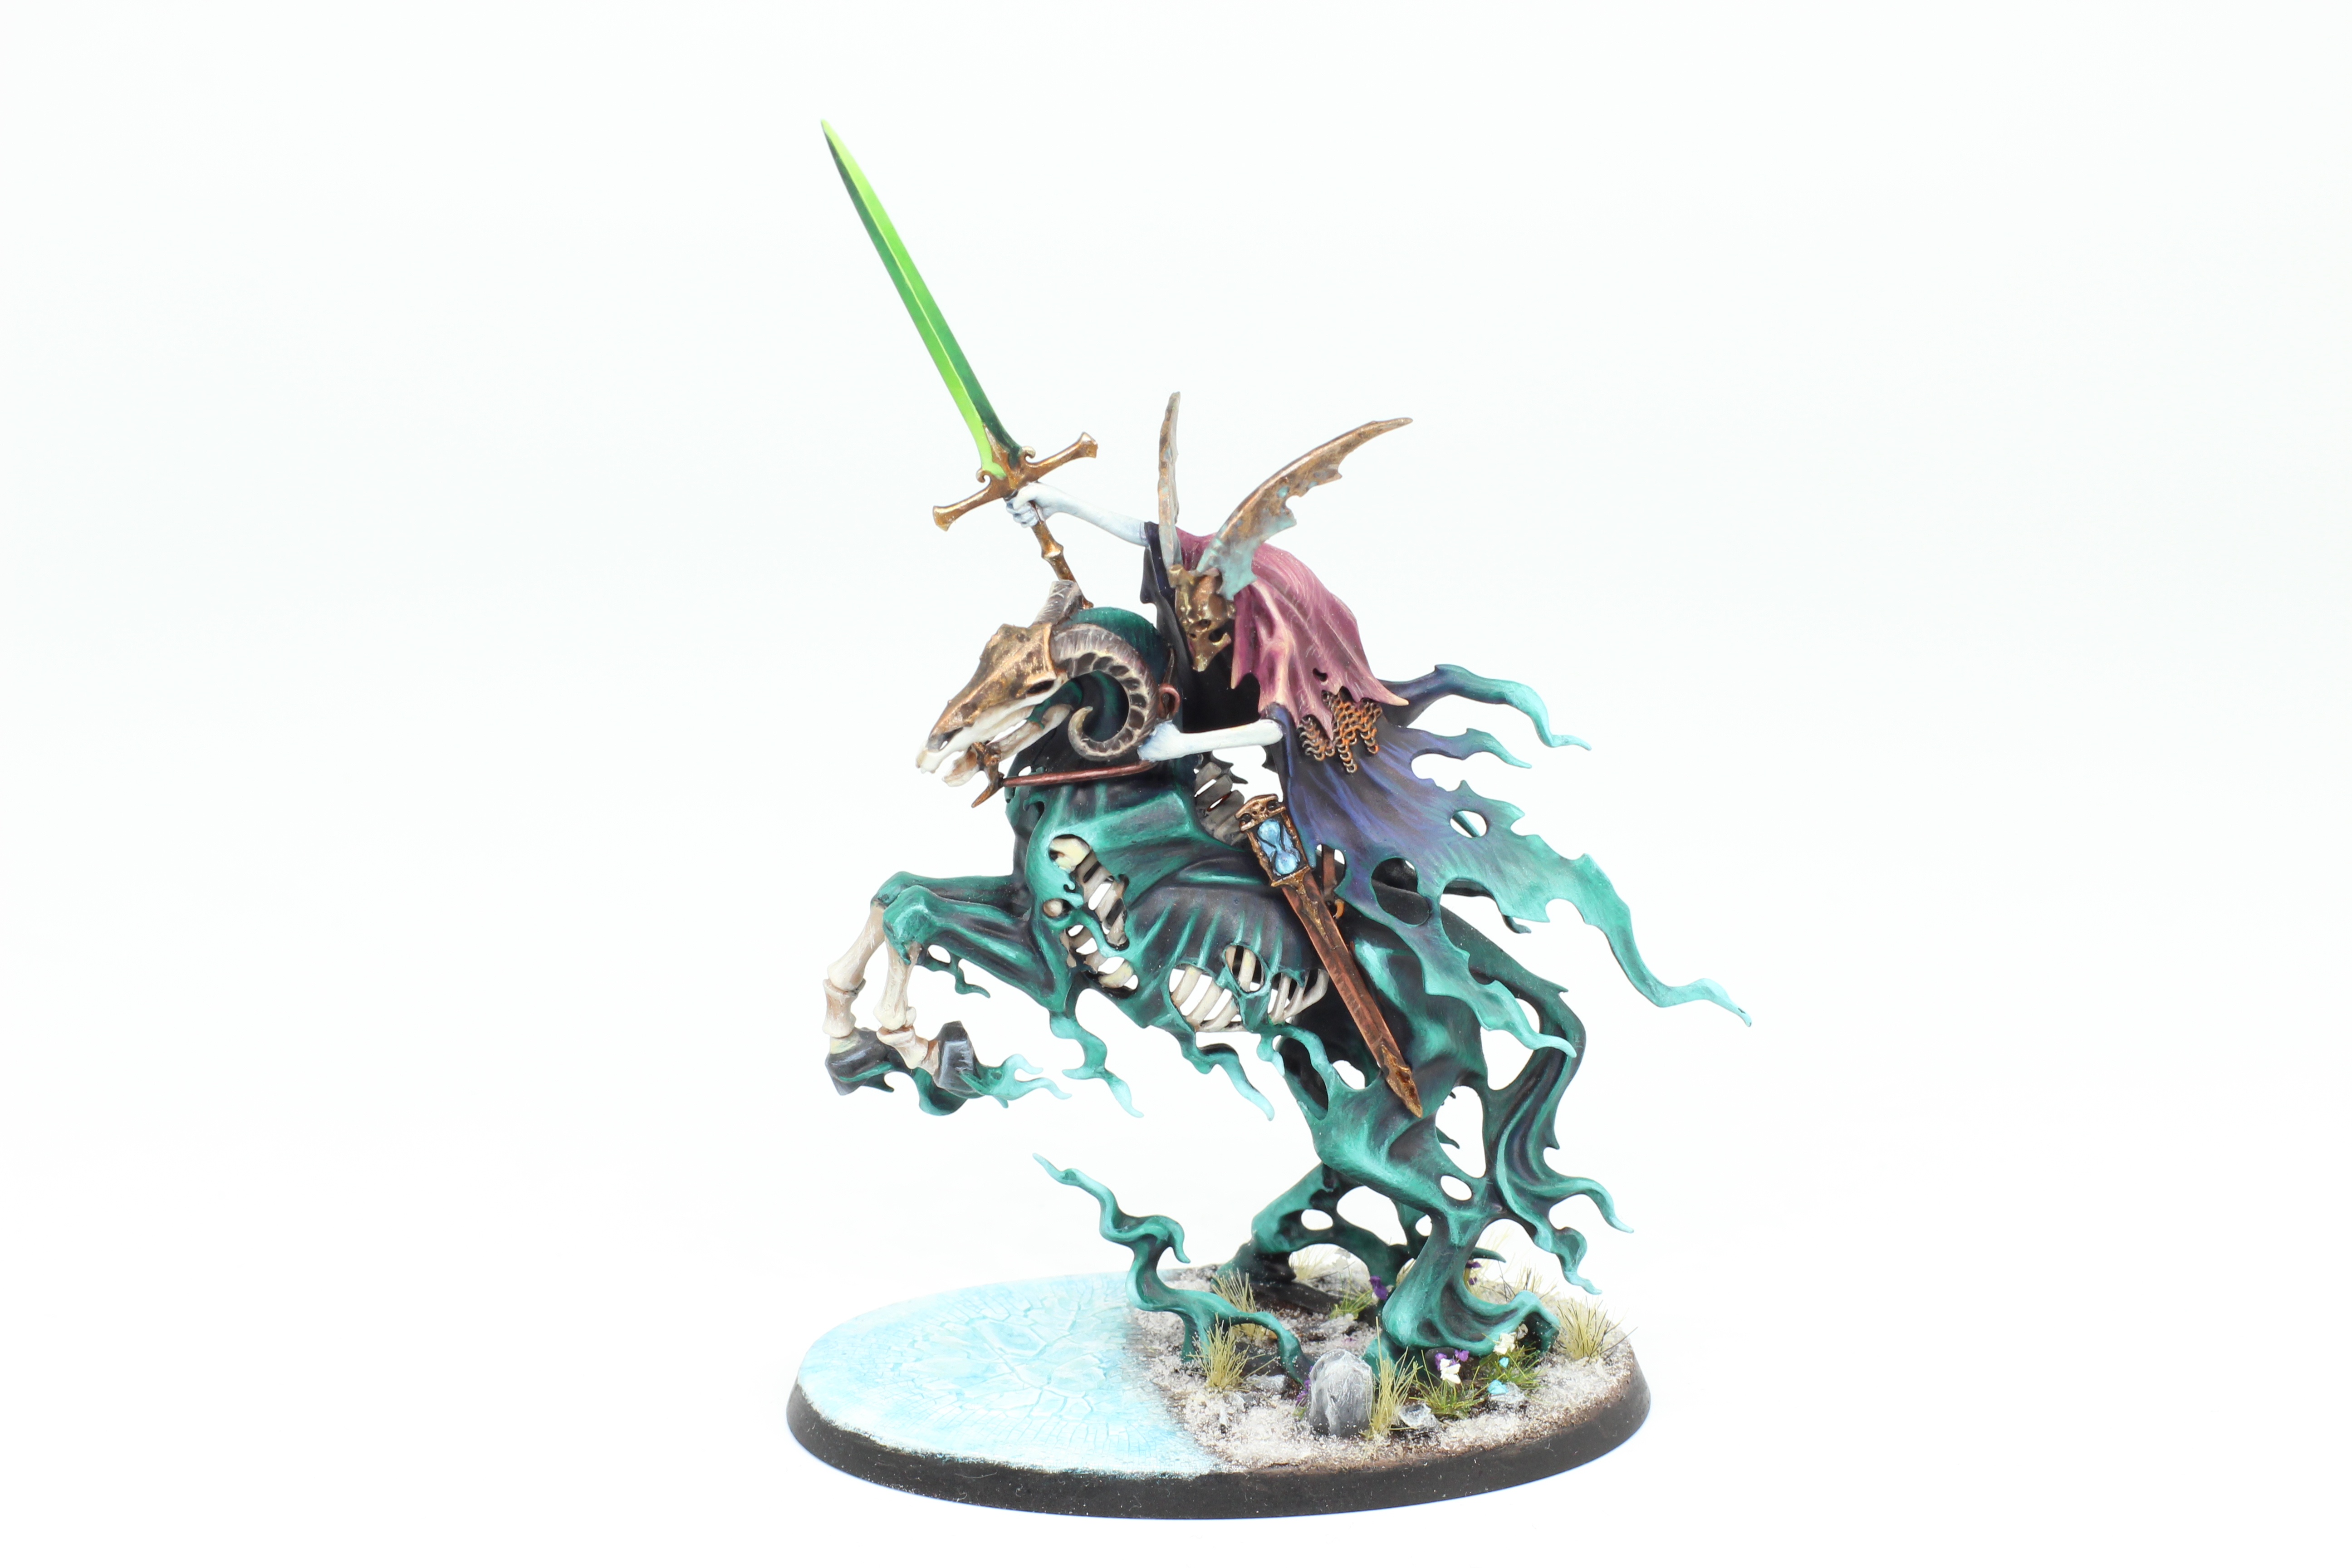 Knight of shrouds on ethereal steed